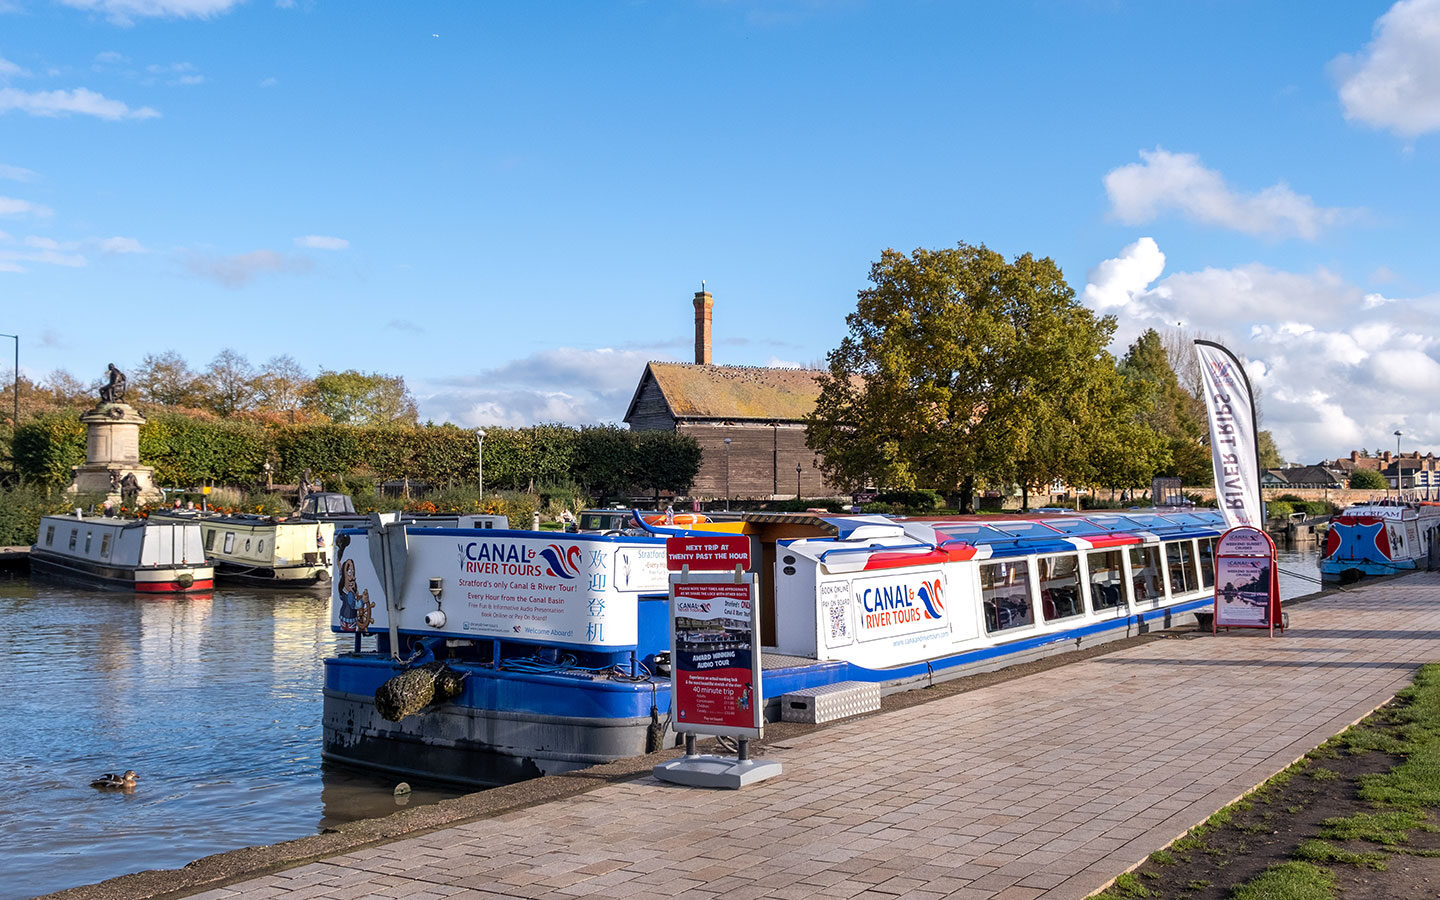 Canal and River Tours boat trip on the River Avon